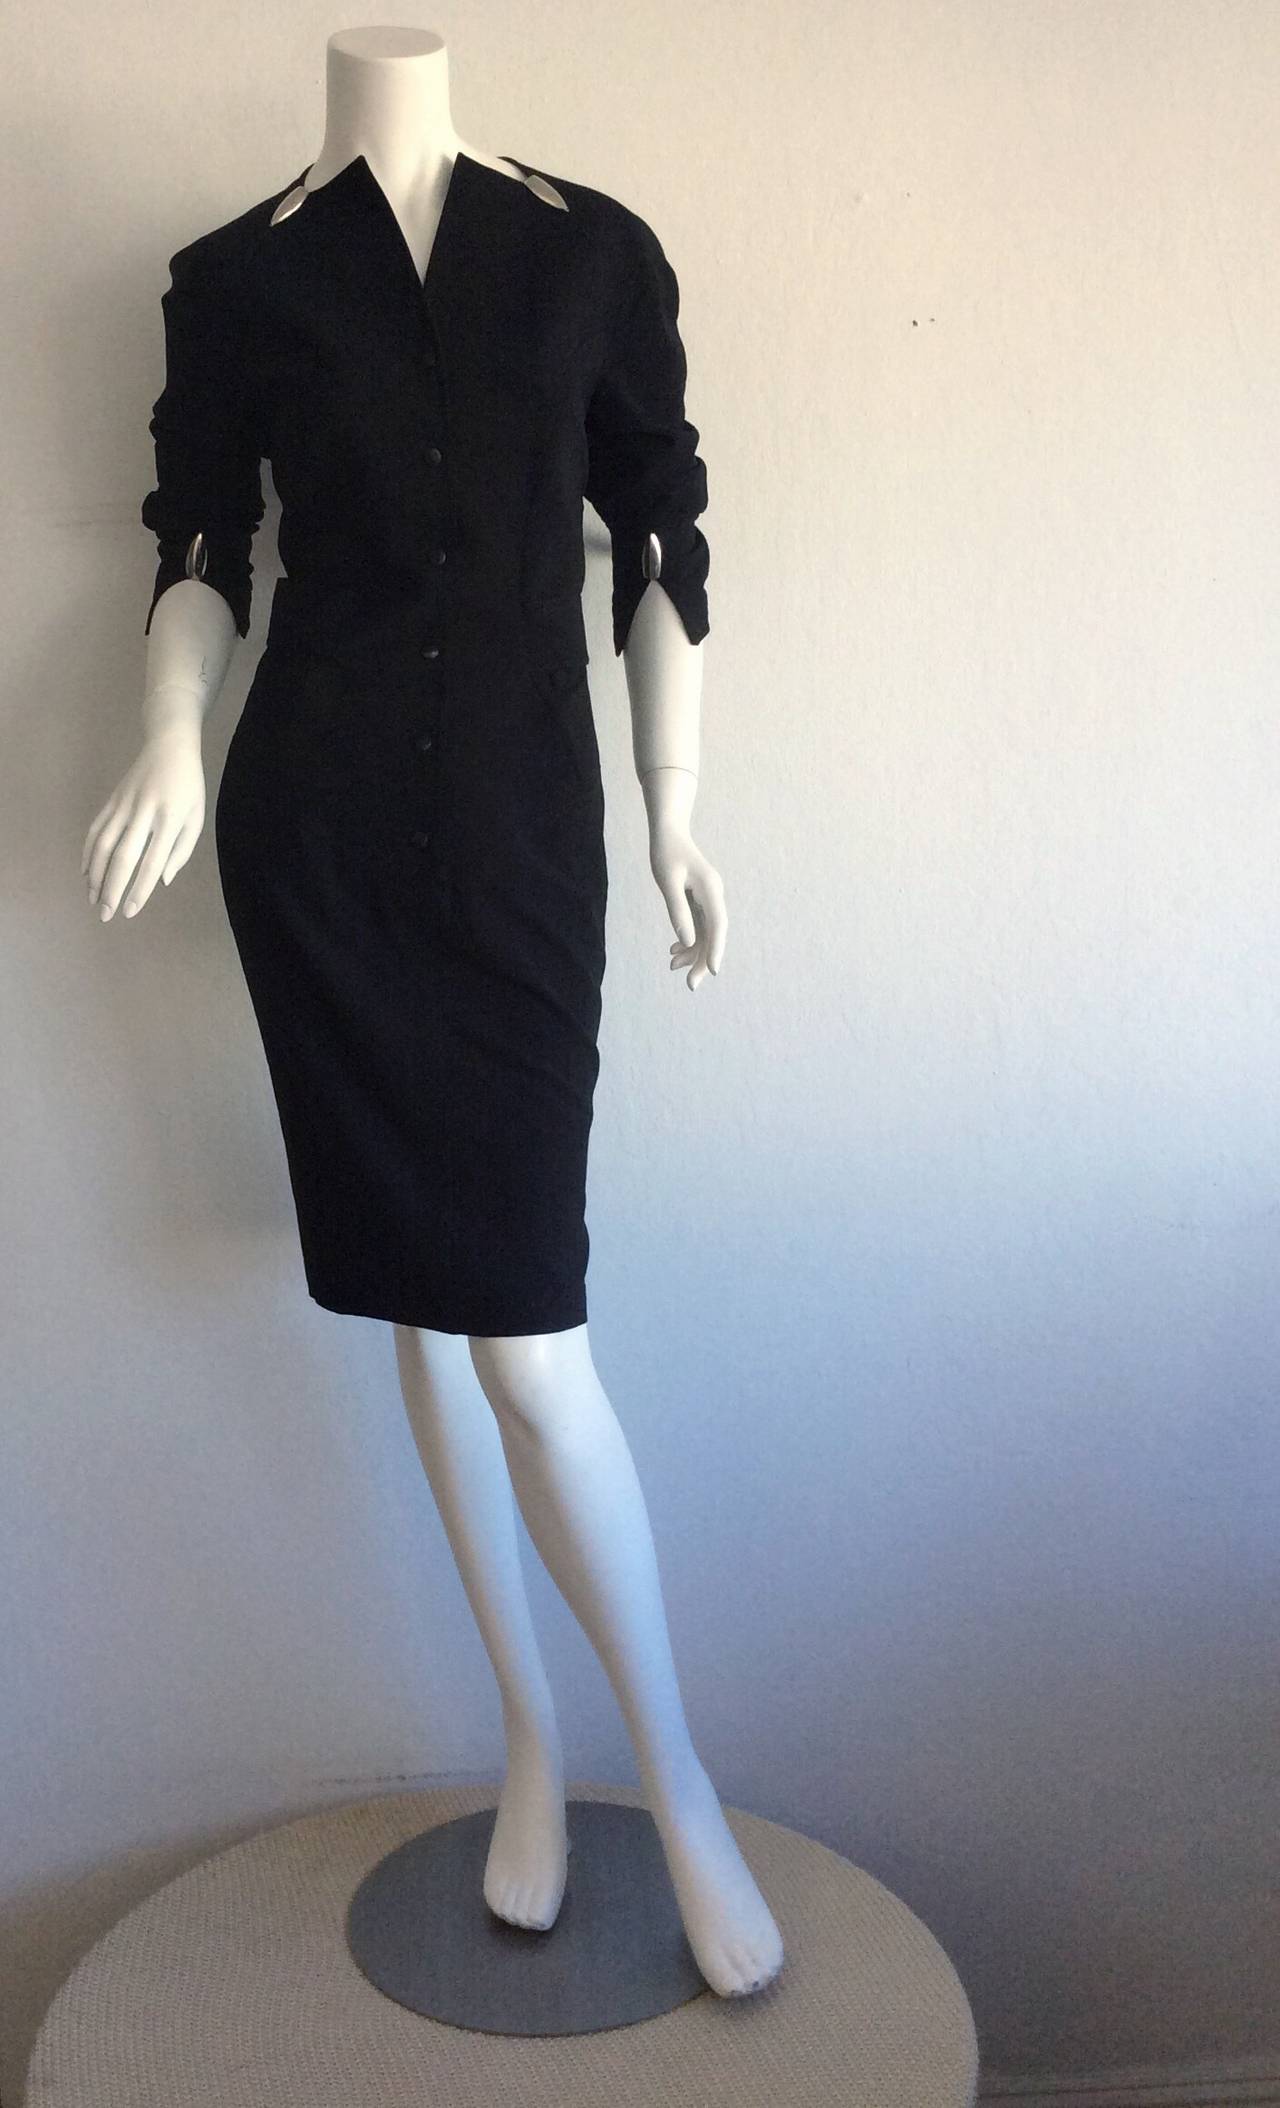 Remarkable vintage Thierry Mugler black dress! Features silver metal 'bullets' at collar, cuffs, and on one side of the skirt hem (at slit). Attached belt that fastens in the back, with the signature angled Mugler buckle. Snaps shut up the bodice,